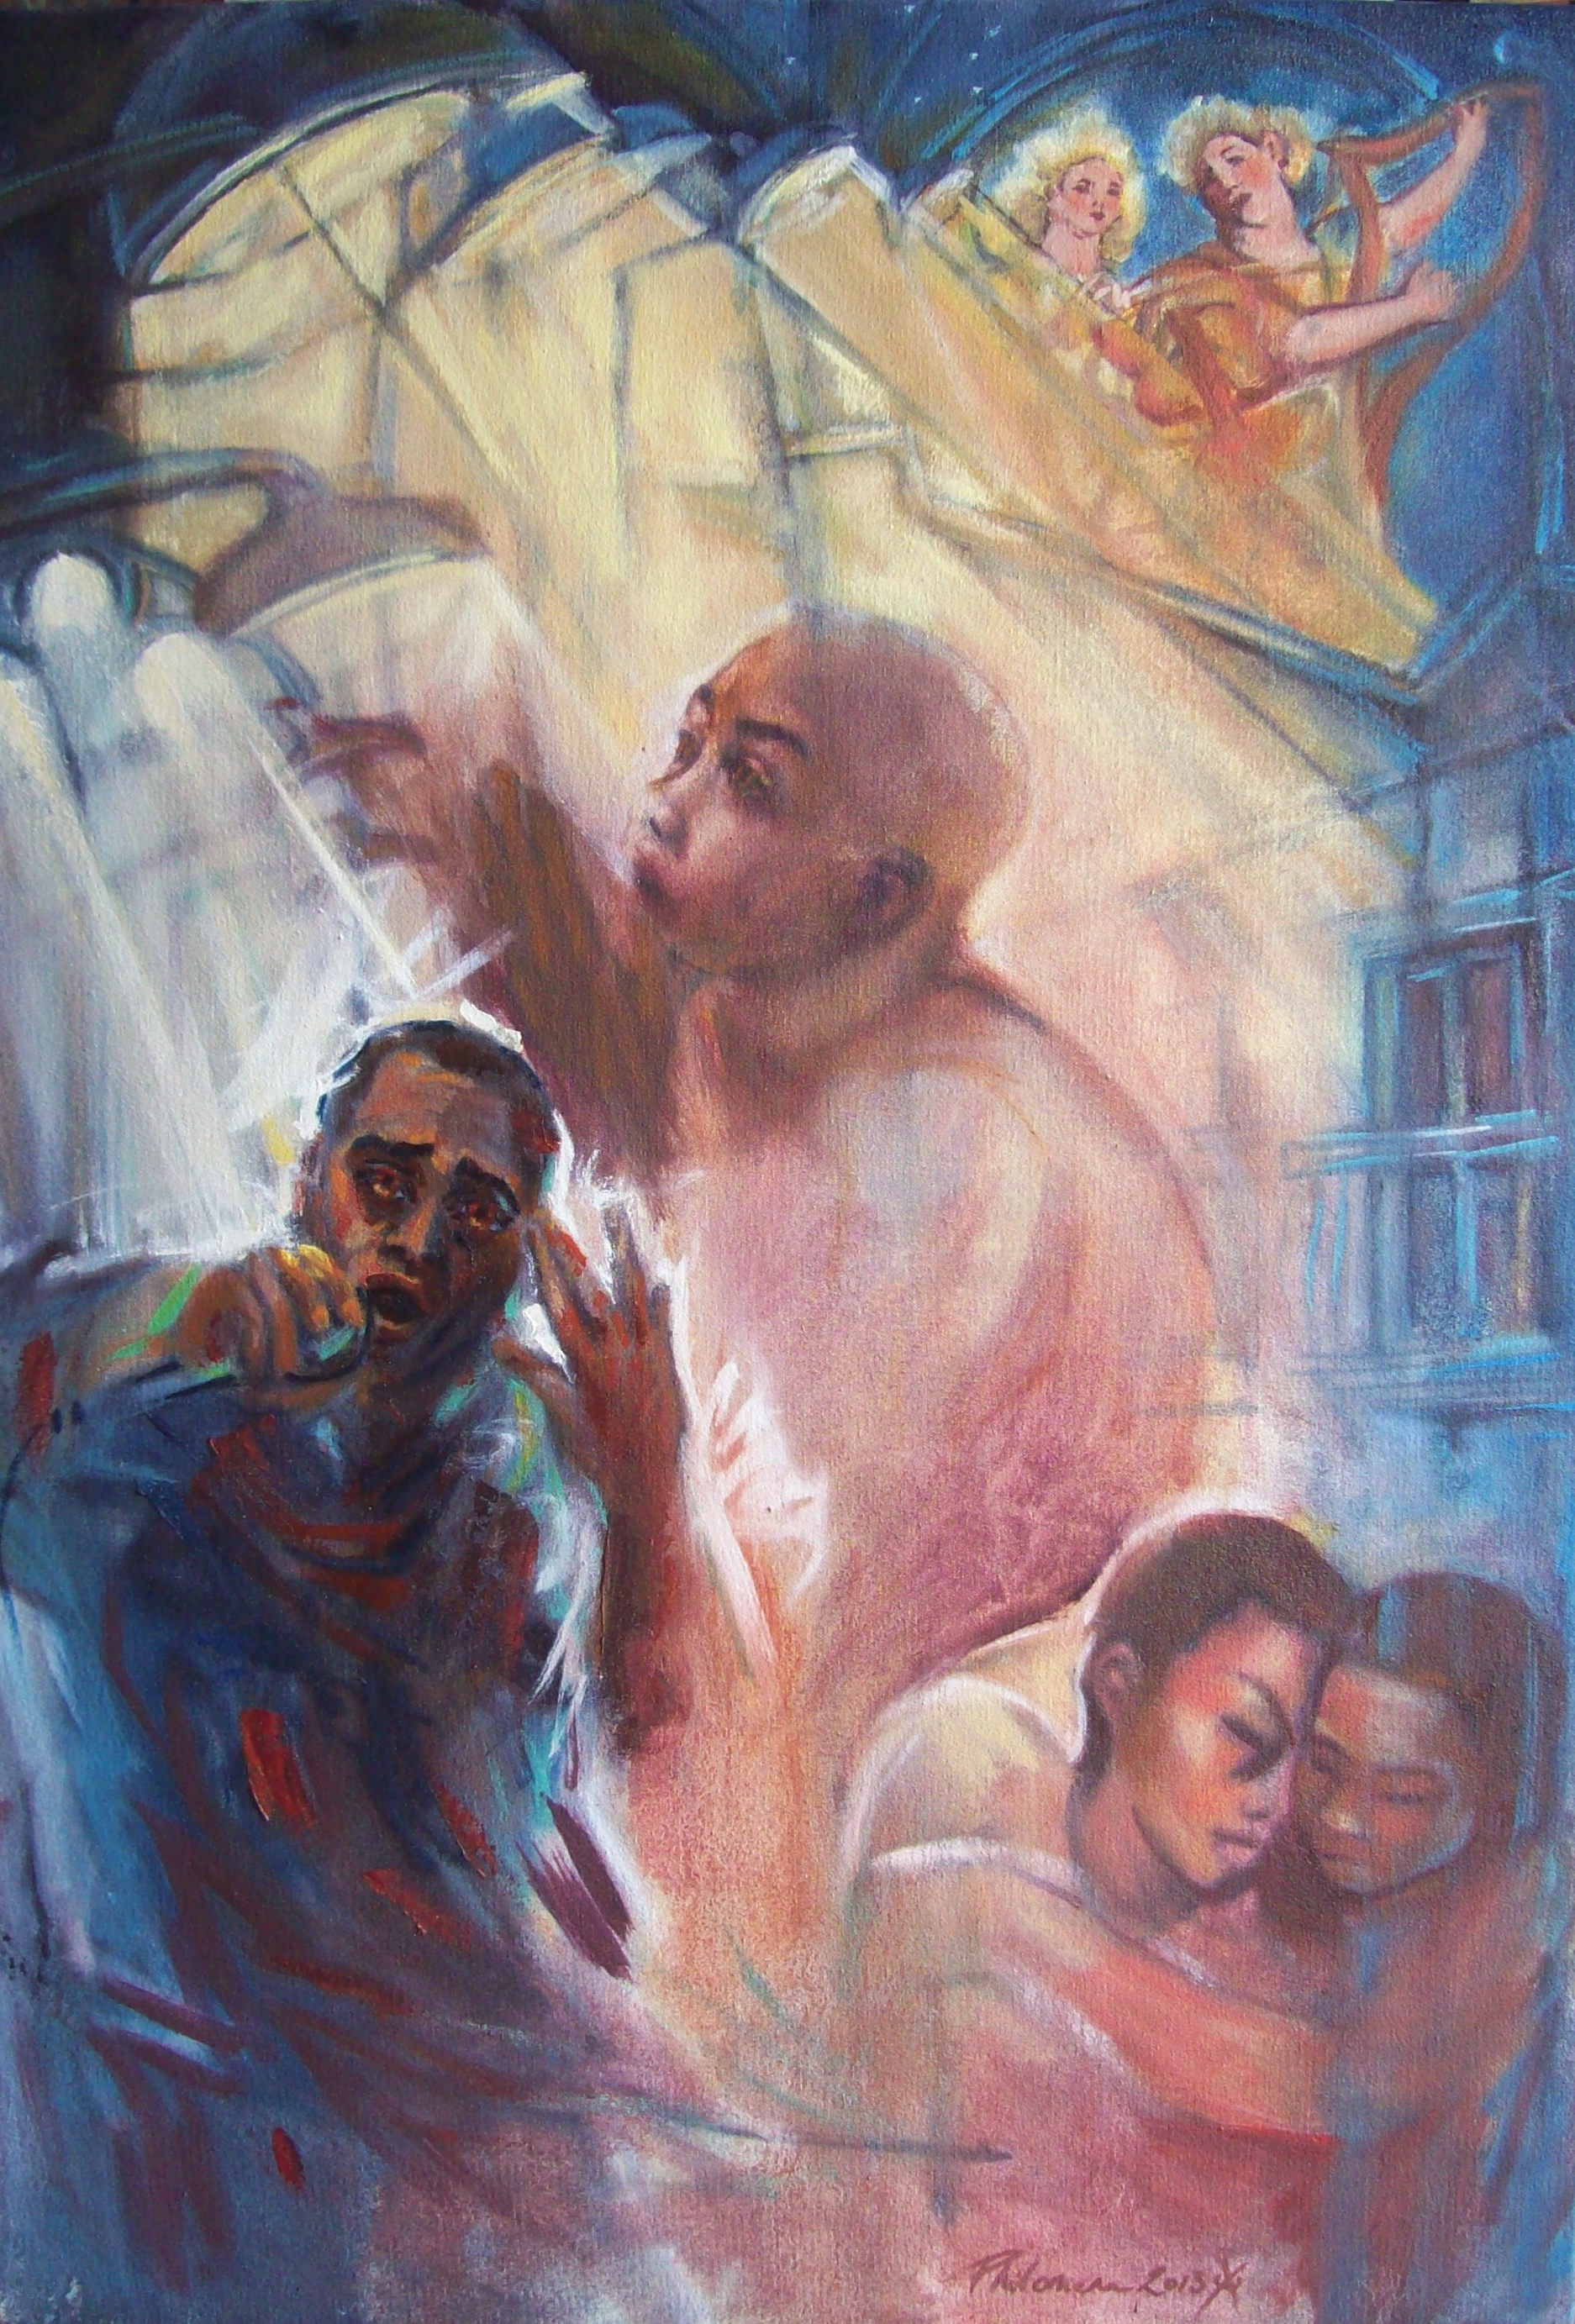 A narrative oil painting about song, singers and angels